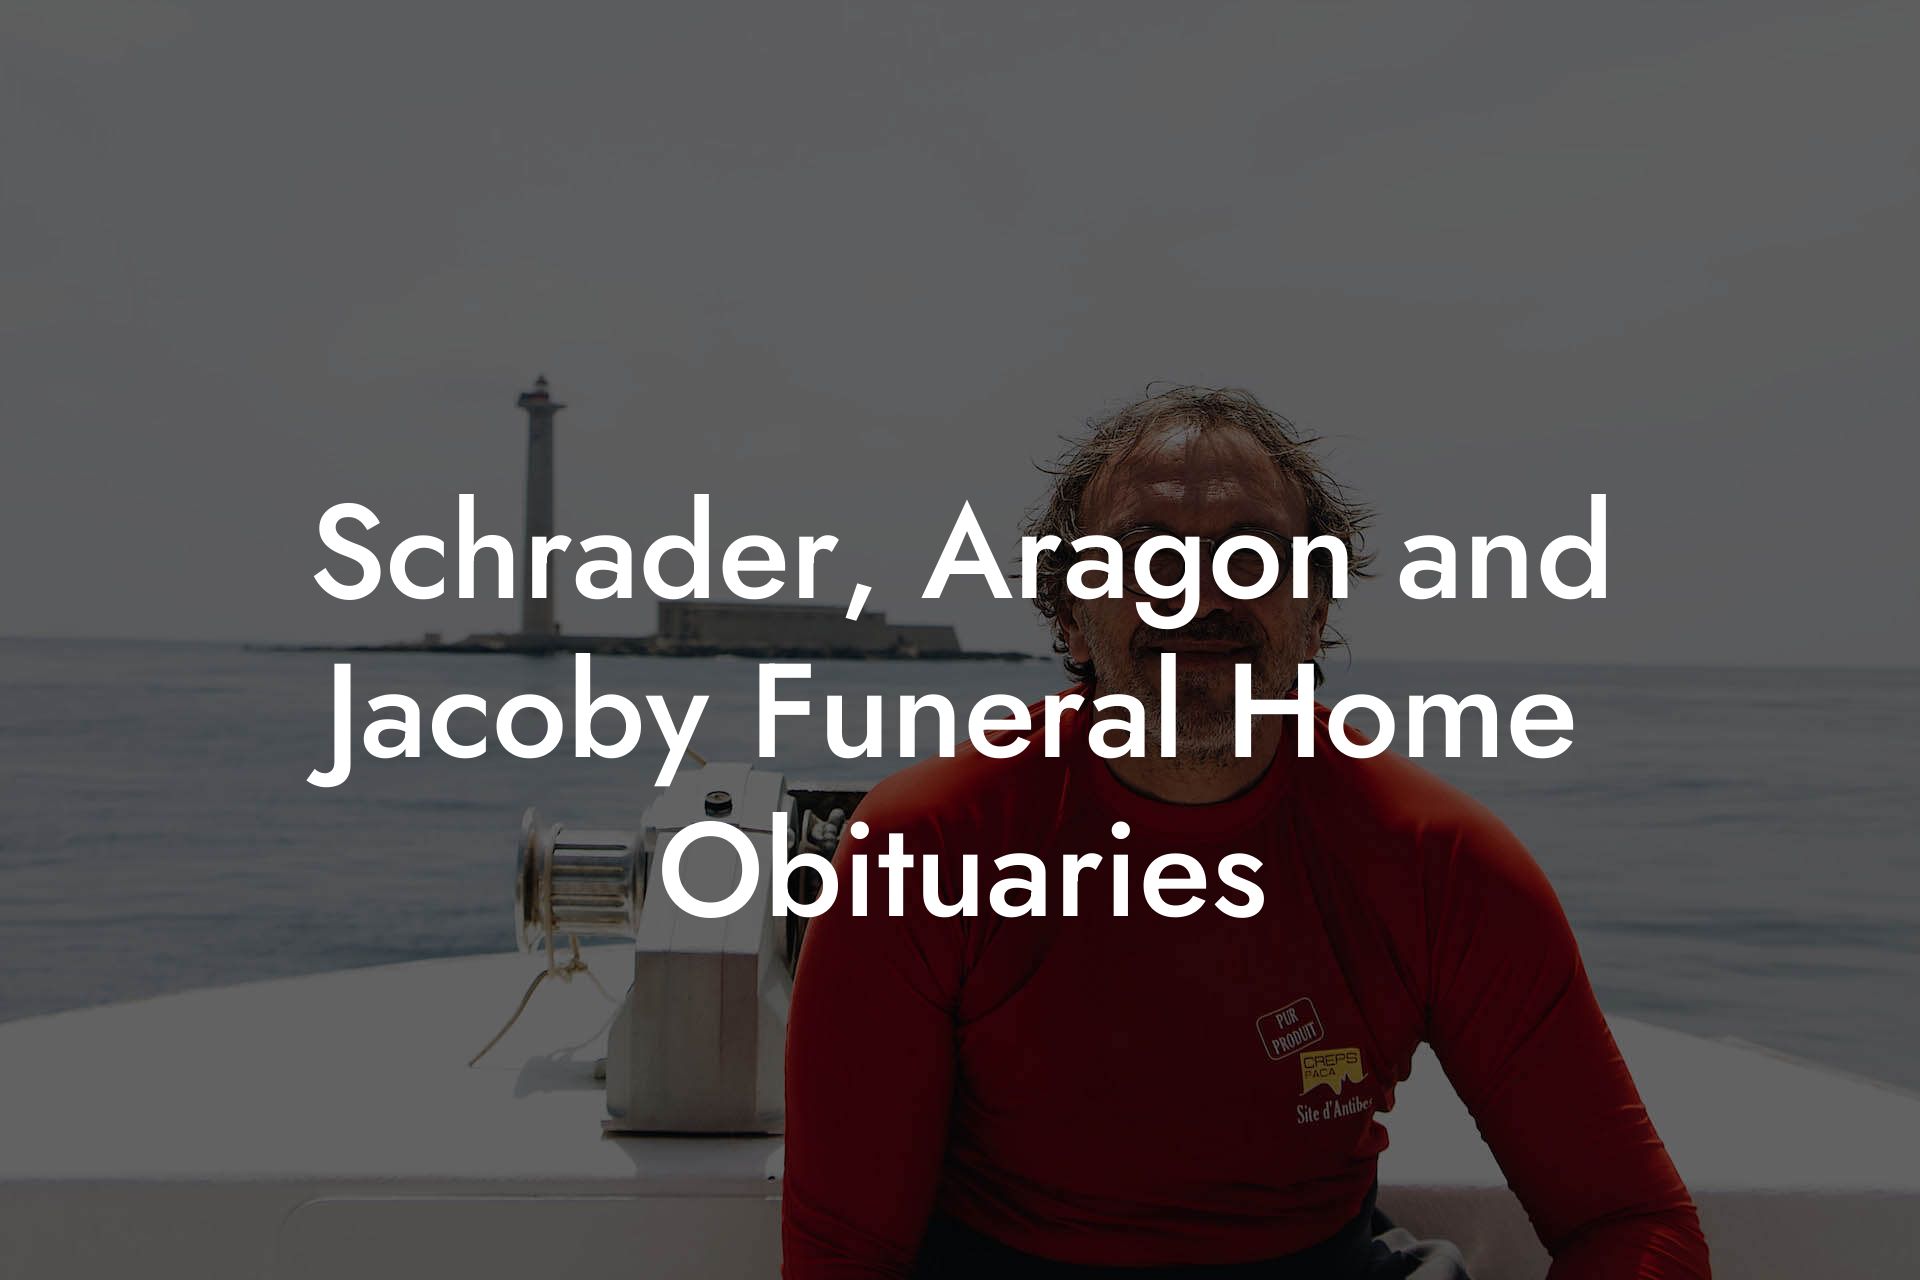 Schrader, Aragon and Jacoby Funeral Home Obituaries